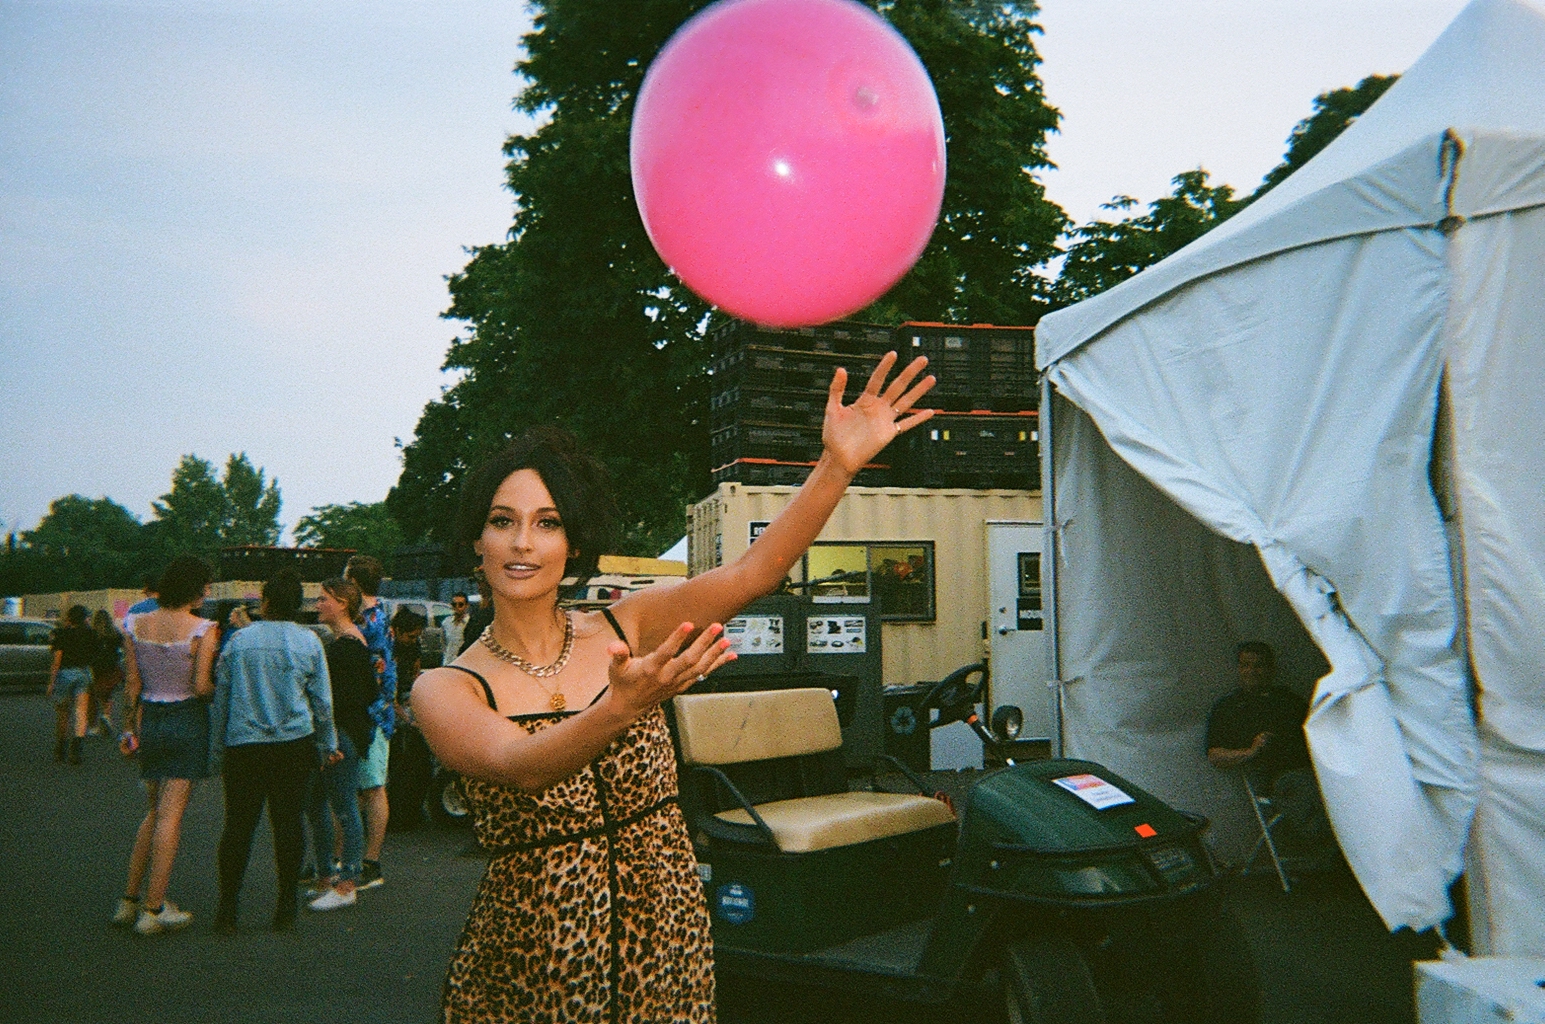  Country sweetheart Kasey Musgraves having a ball backstage before her set.